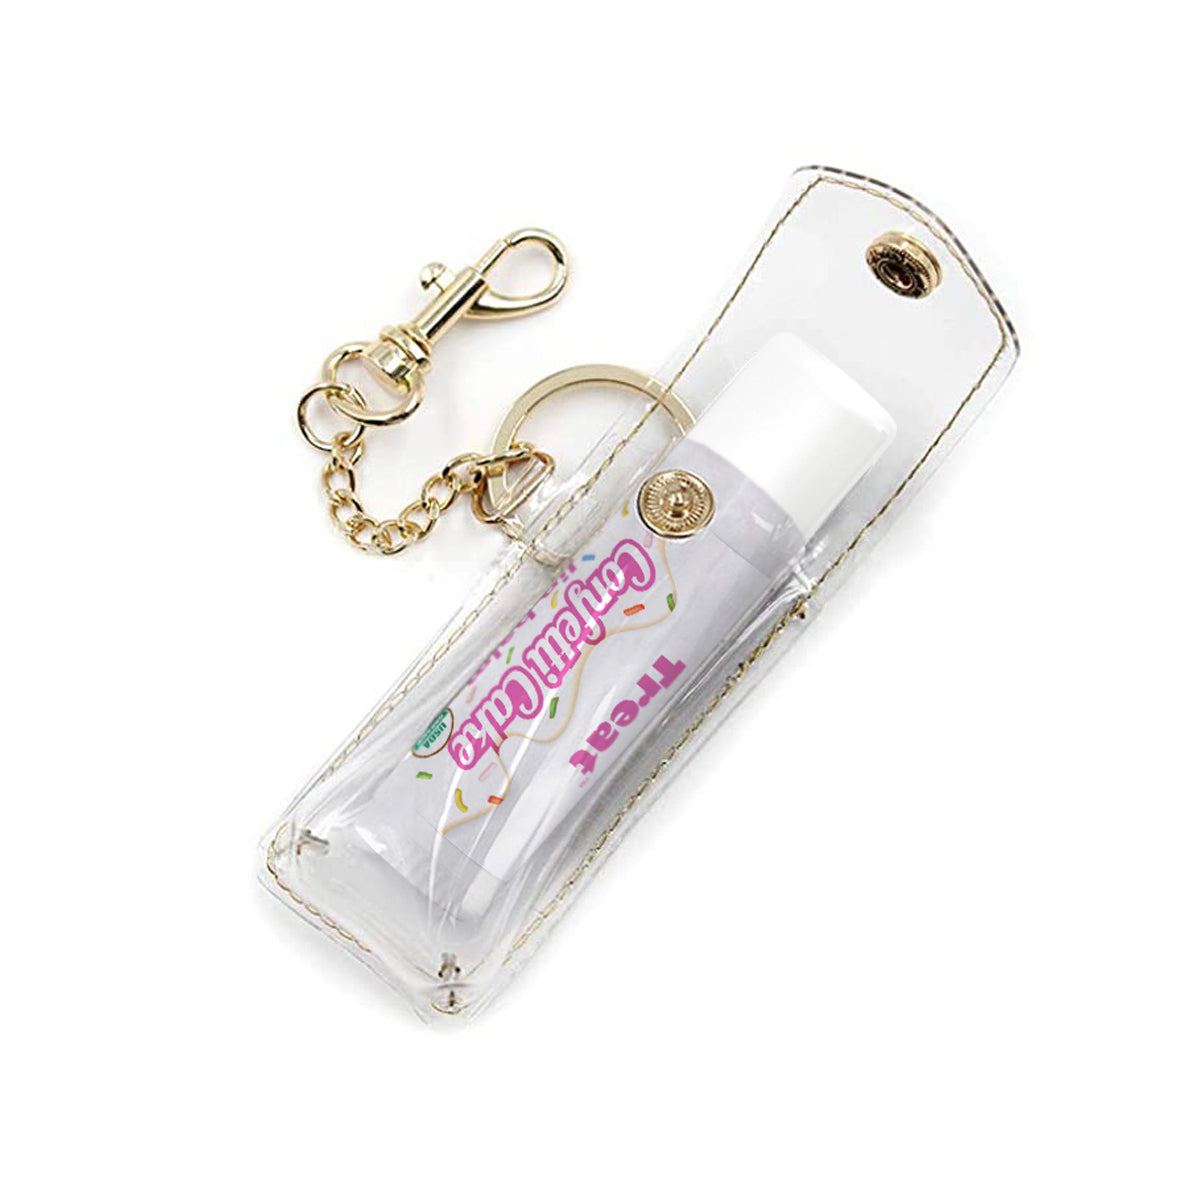 CHARGED UP KEY CHAIN POUCH – Ruby's Balm